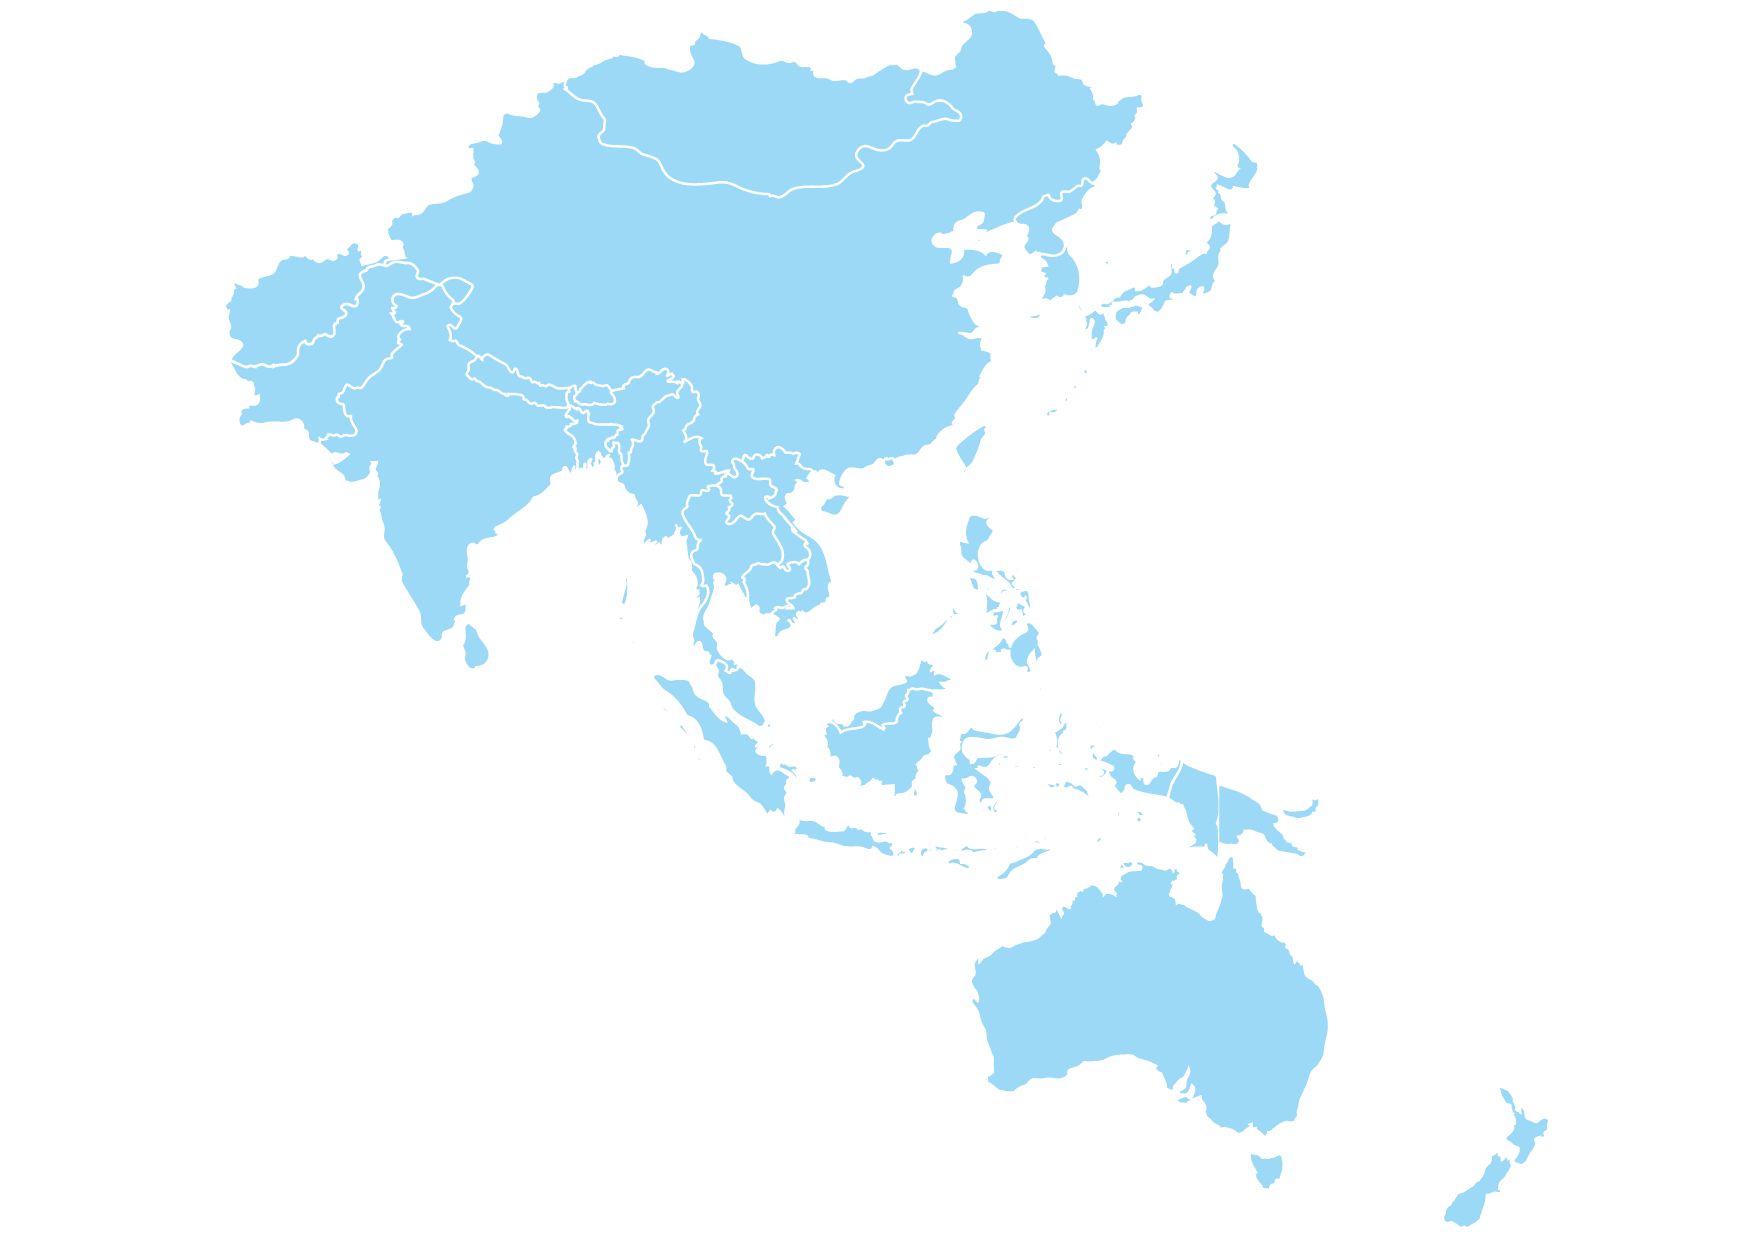 light blue map of the Asia Pacific region